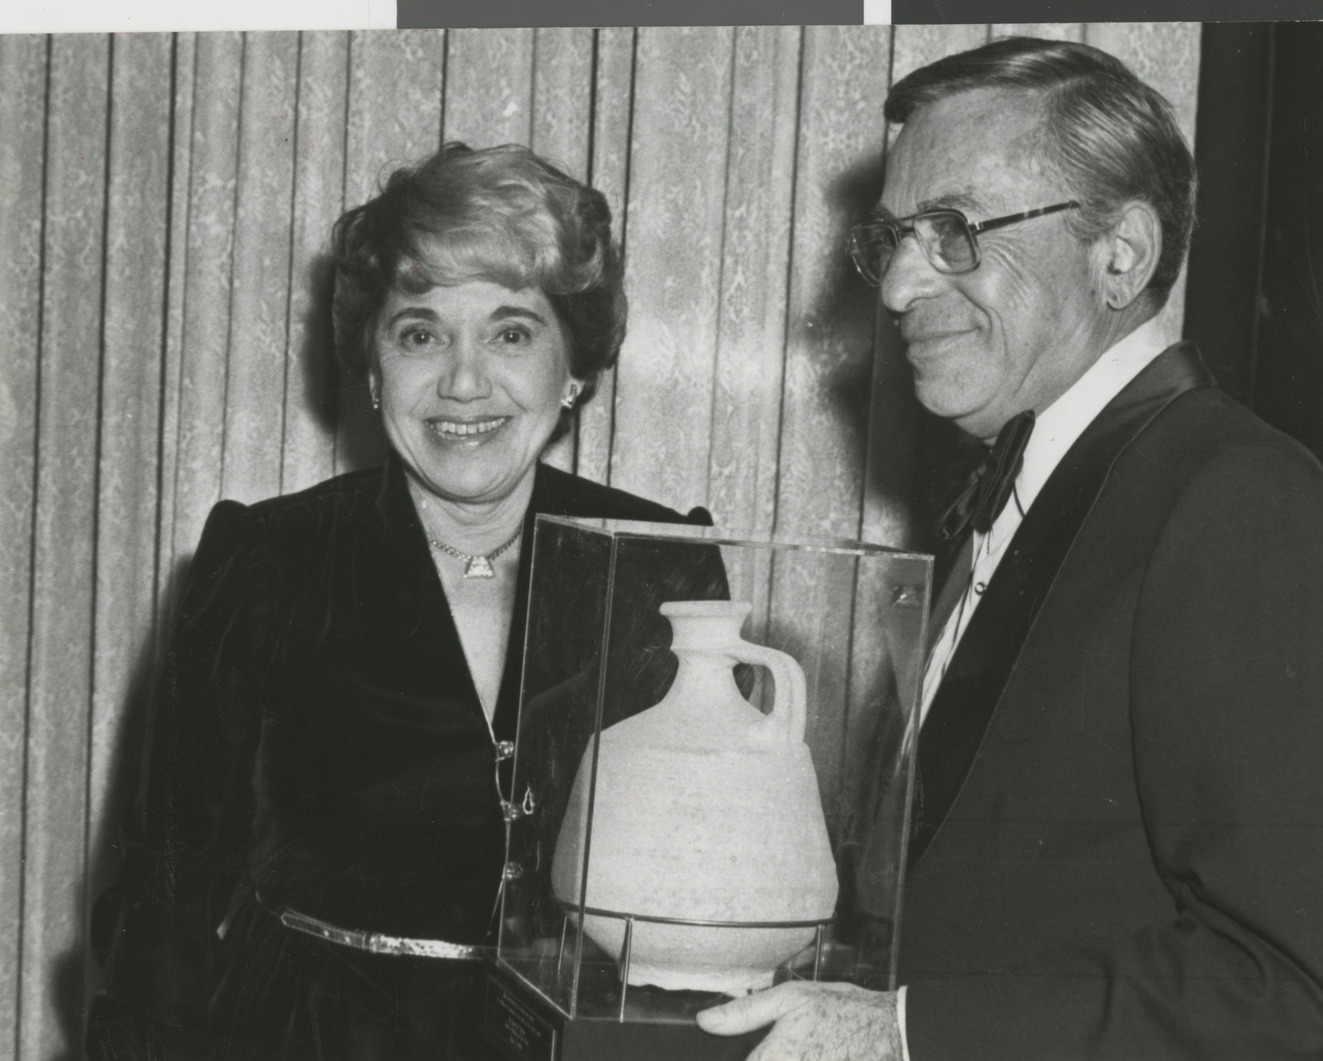 Photograph of Edythe Katz with unknown man holding a terra cotta pot (in a case), which was donated to decorate the Lloyd Katz Honors Lounge at UNLV Library